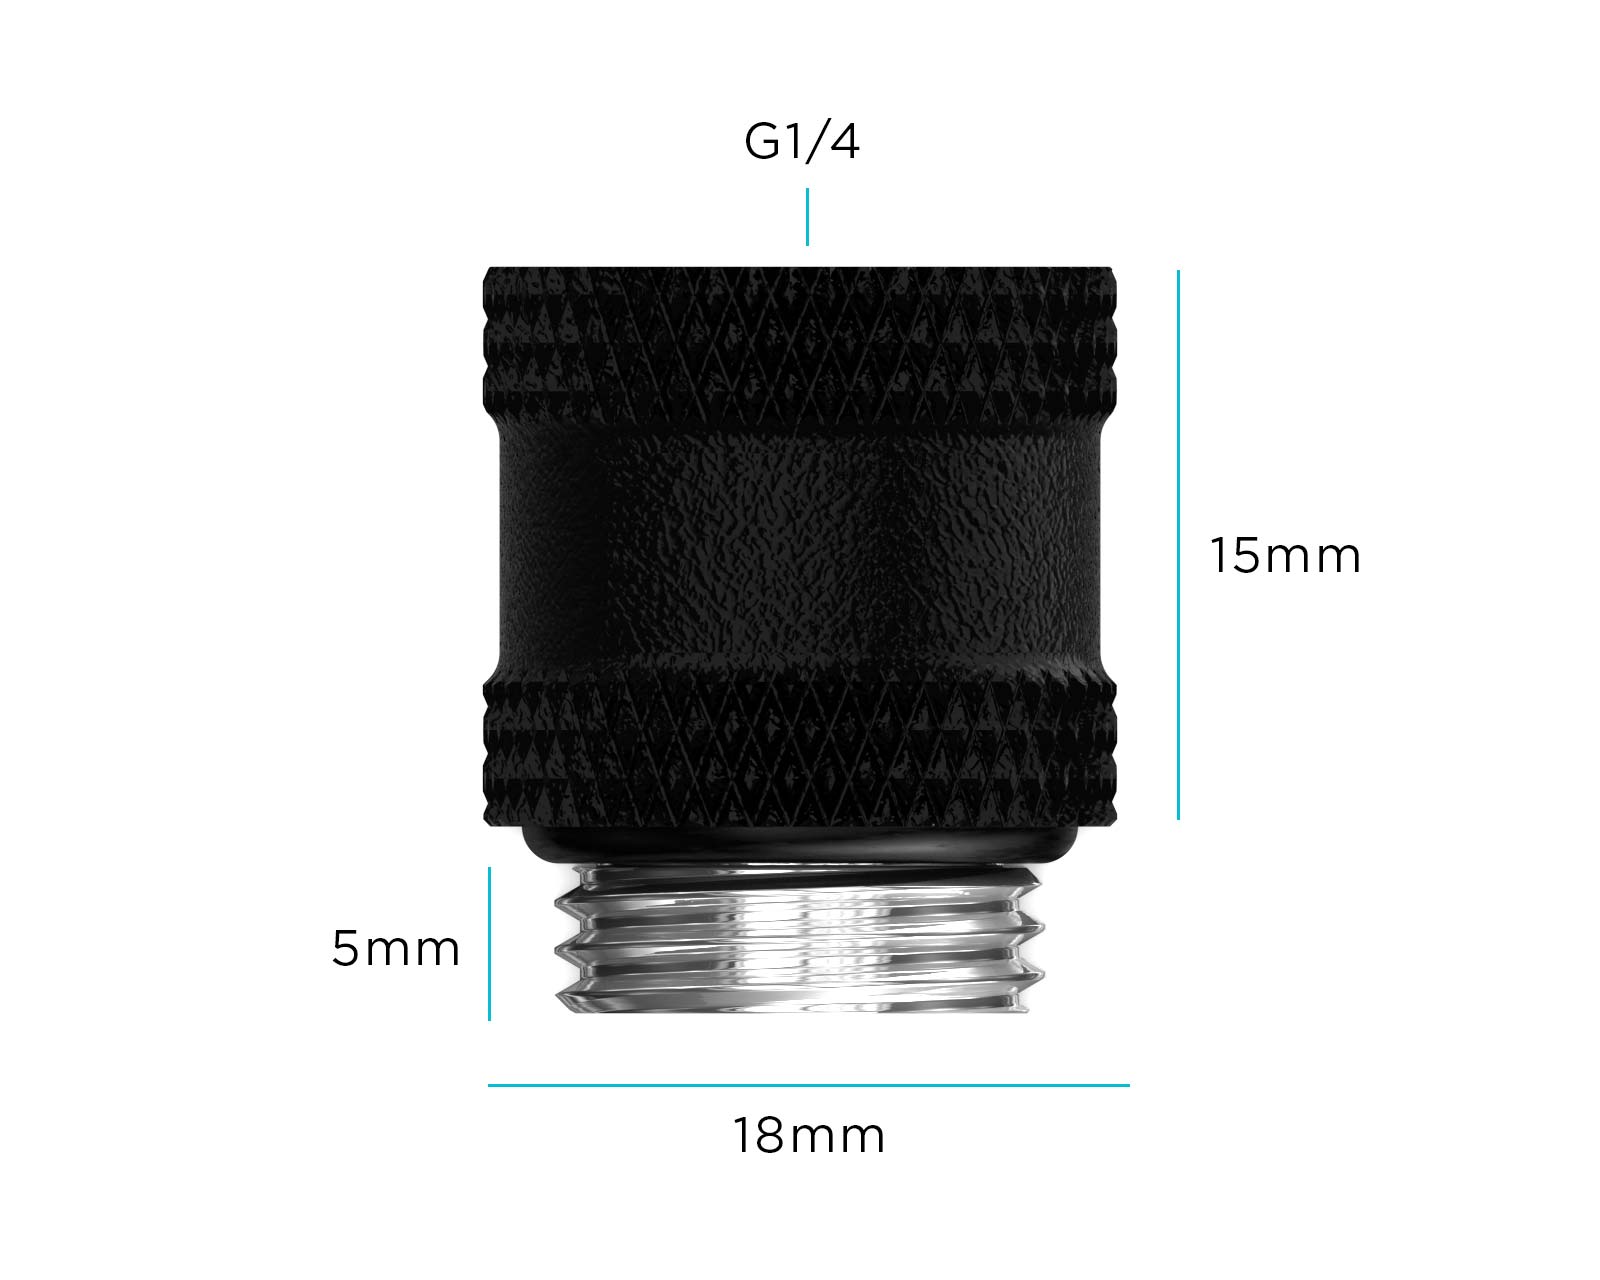 PrimoChill Male to Female G 1/4in. 15mm SX Extension Coupler - Satin Black